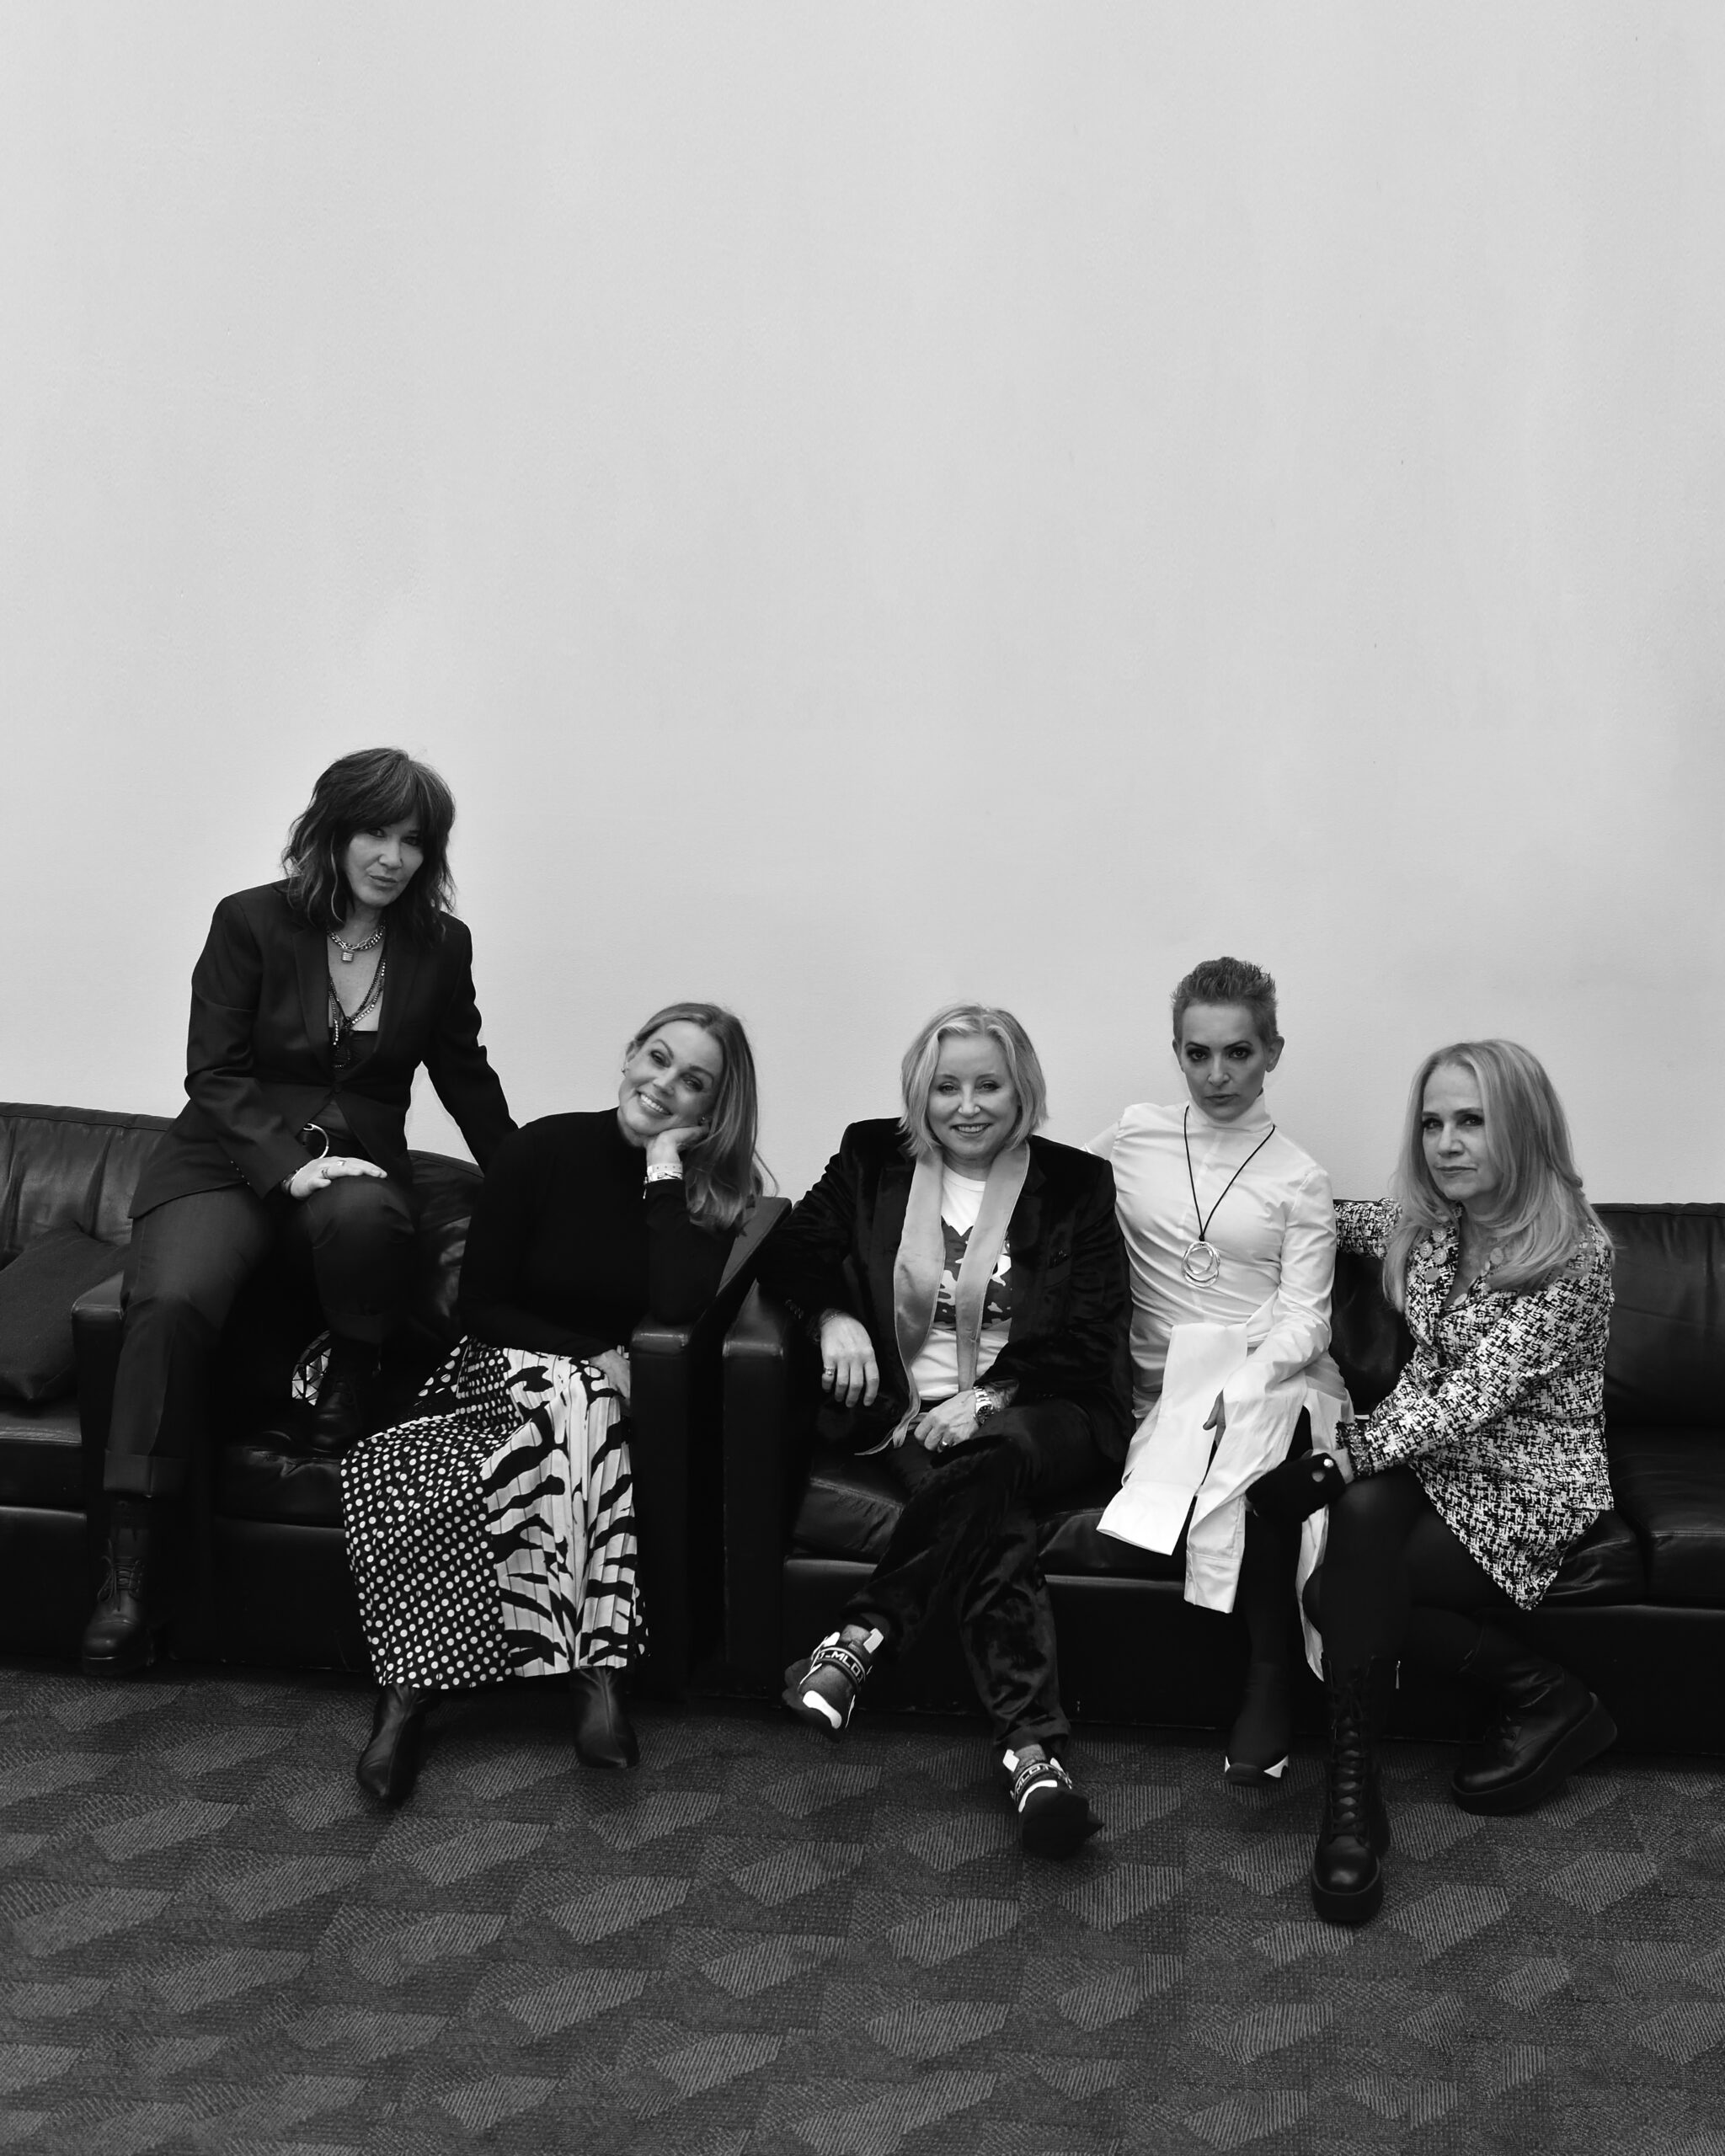 The Go-Go's pose with varied facial expressions while sitting on a couch.